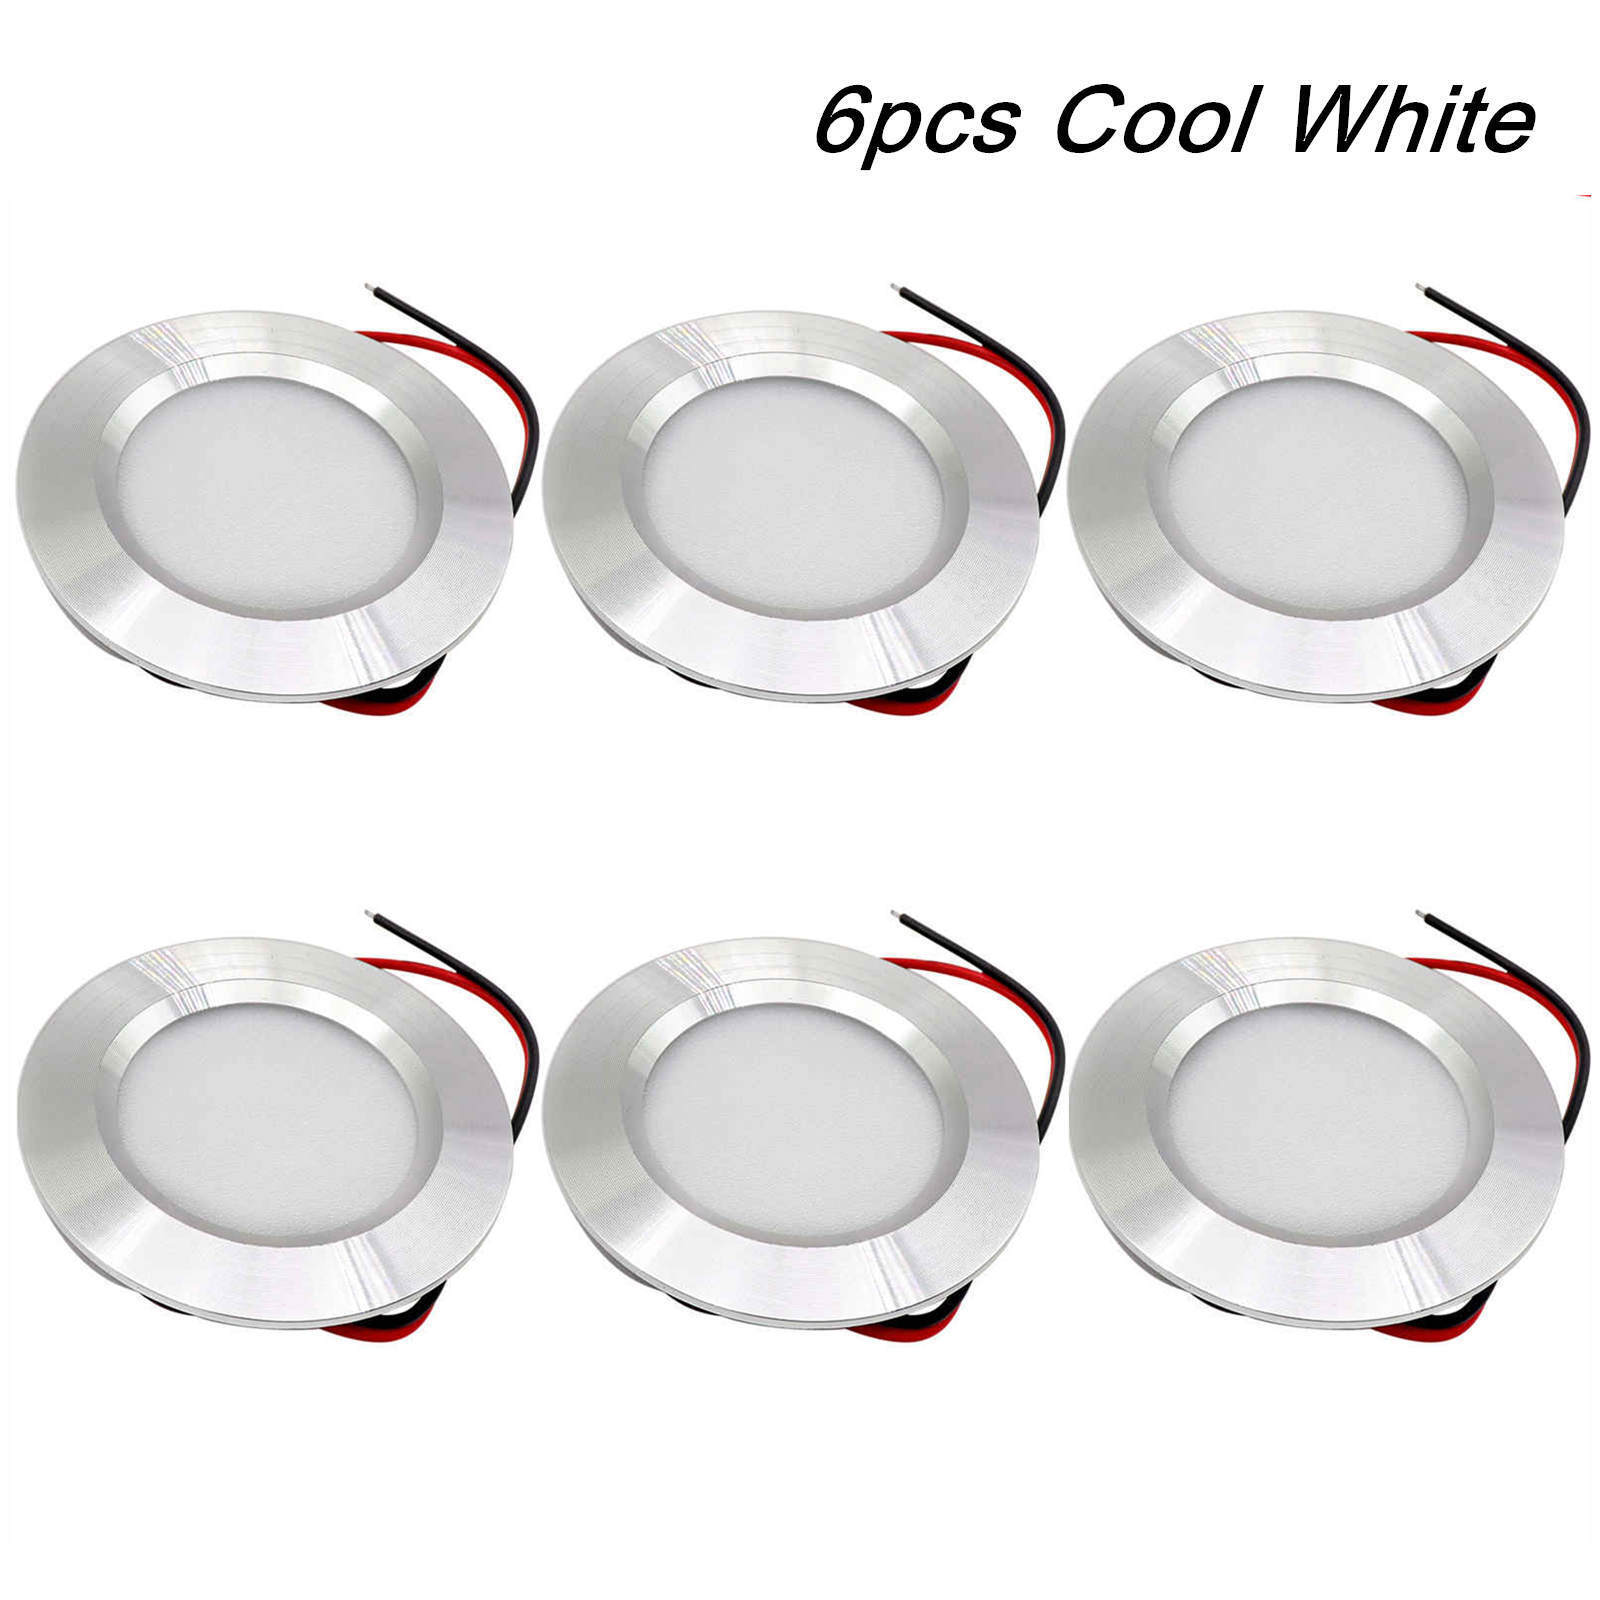 6X 12volt 3w LED Recessed Cabinet lights For RV Boat Campe  Silver cool White